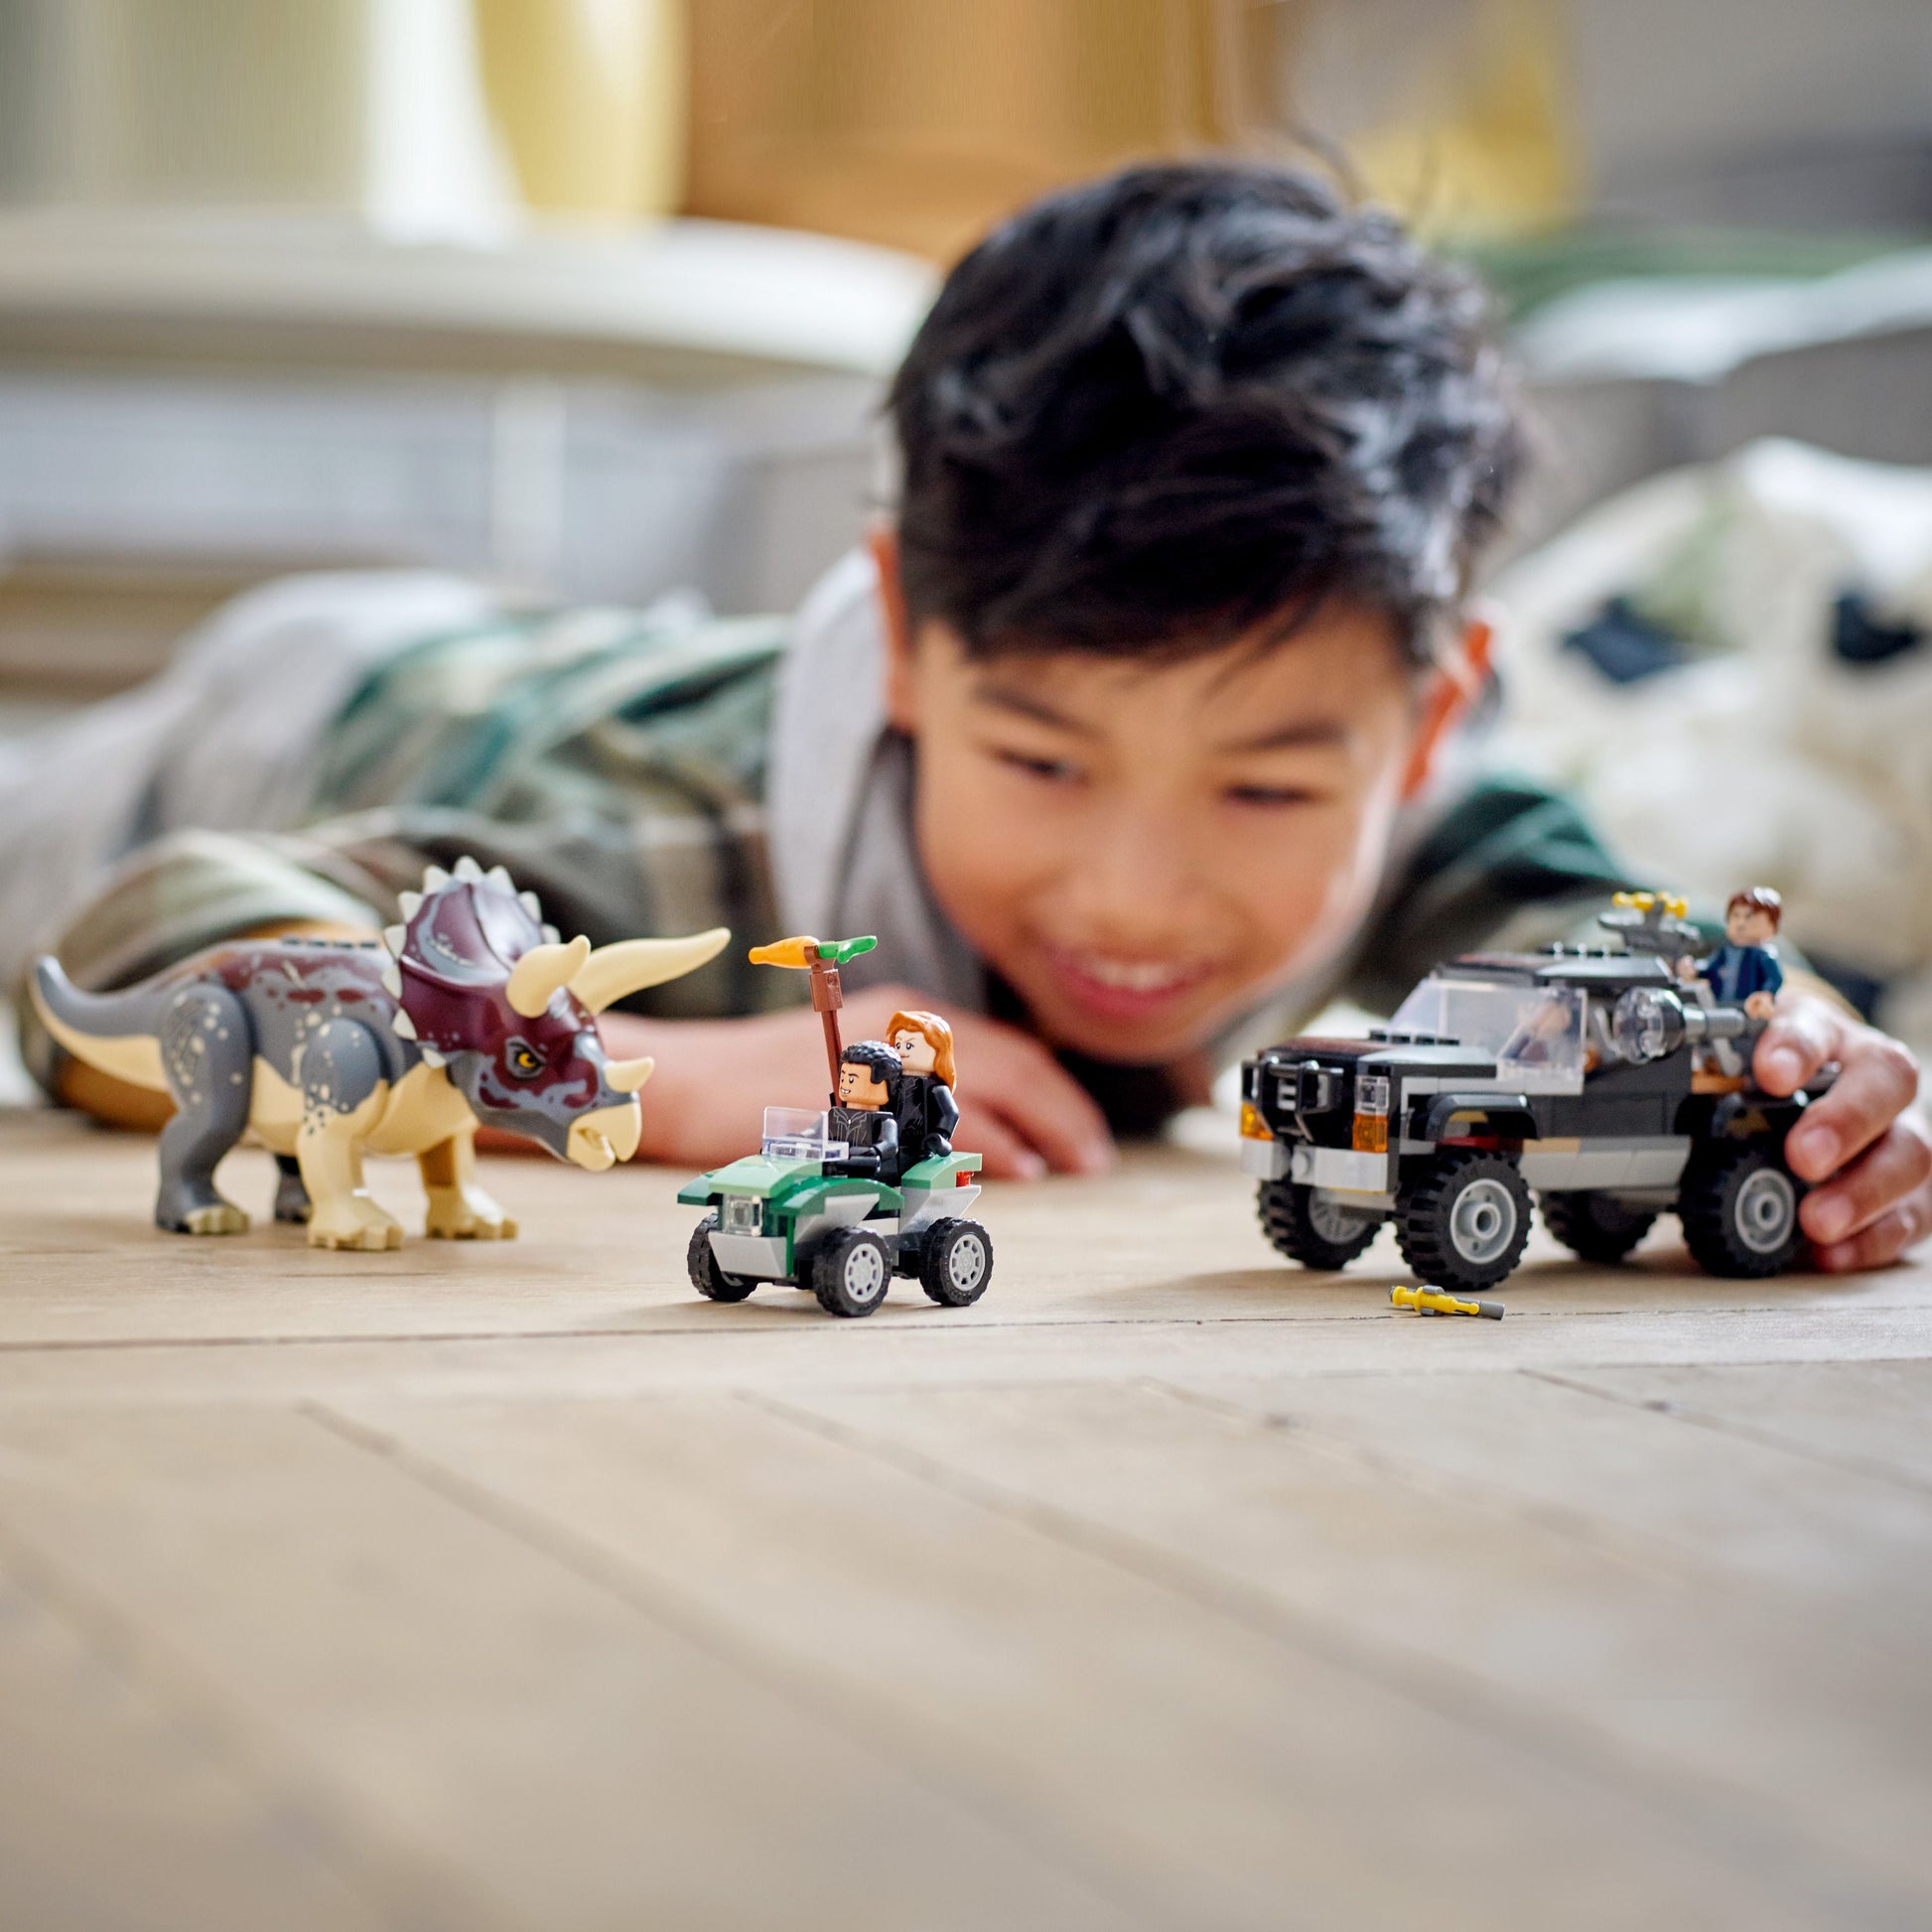 Jurassic World Dino Combo Pack 66774 Toy Value Pack, 2 in 1 Triceratops and Velociraptor Gift Set, Jurassic World Toy with Dinosaur and Truck Toys, Christmas Gift for Kids Ages 7 and Up